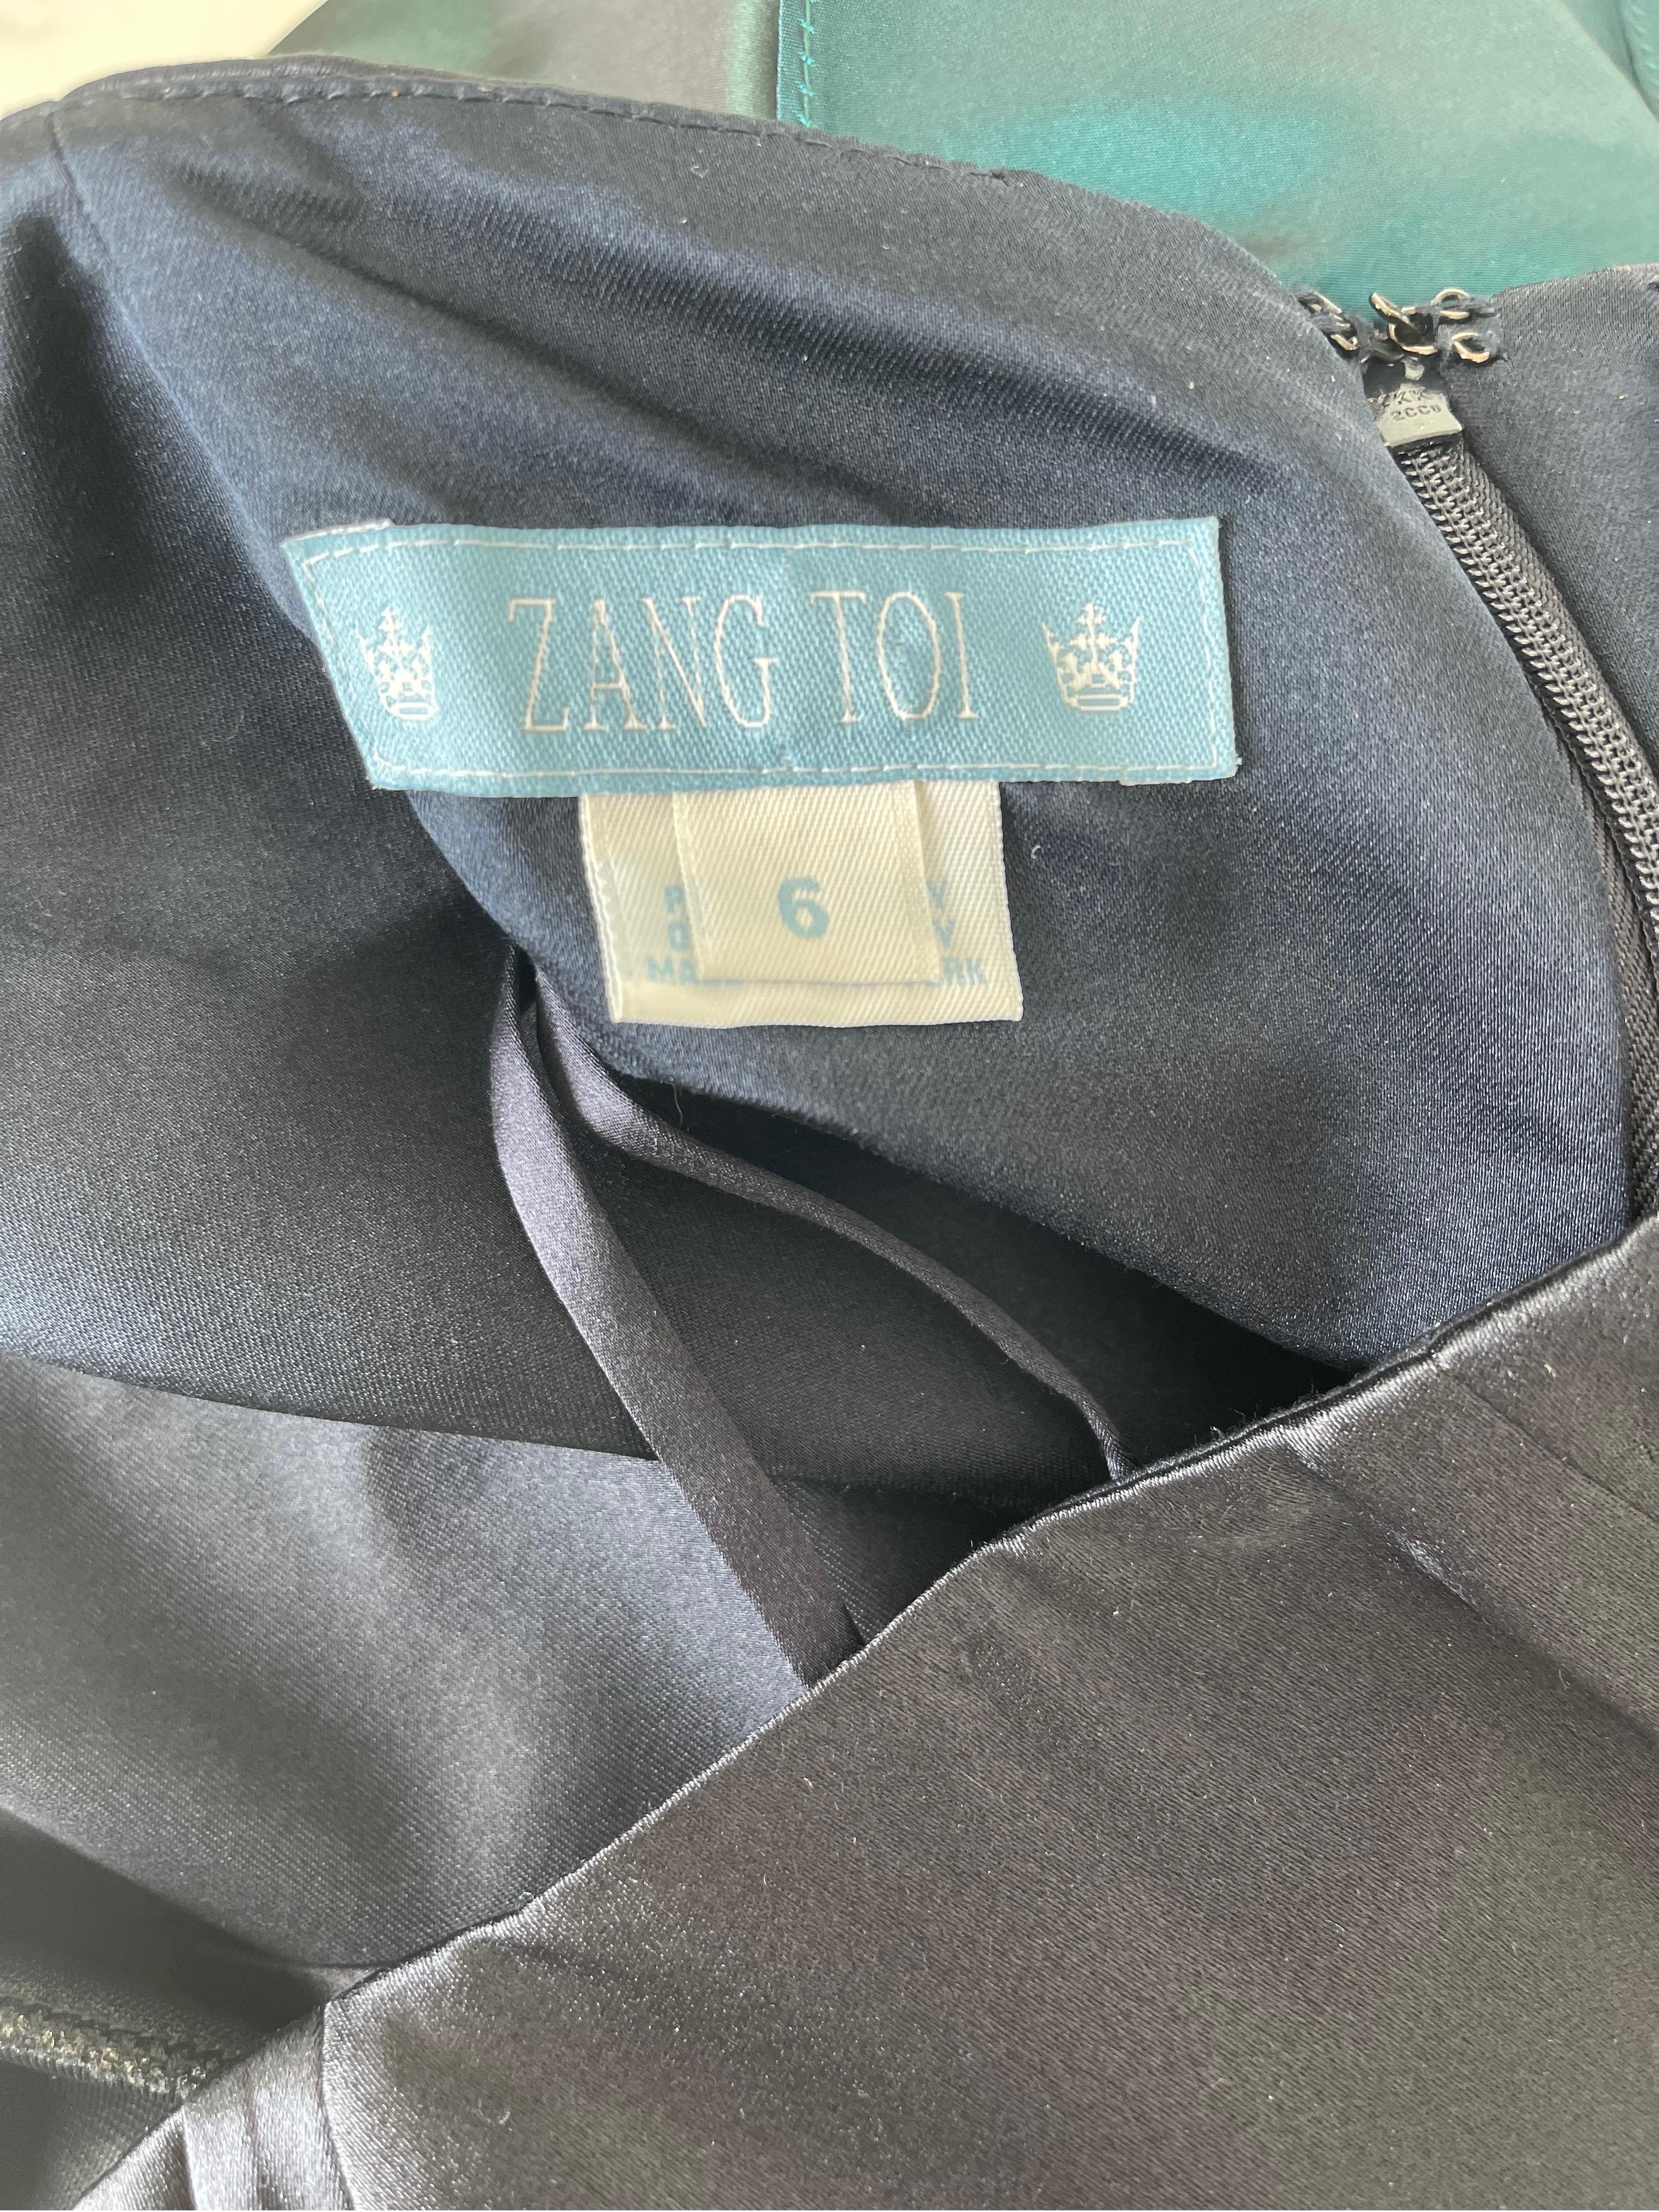 Gorgeous late 90s ZANG TOI navy blue strapless silk flamenco style gown ! This dress is so fun, and designed with so much attention to details. The side features tiers of silk taffeta and chiffon in blues and greens. Hidden zipper up the back with